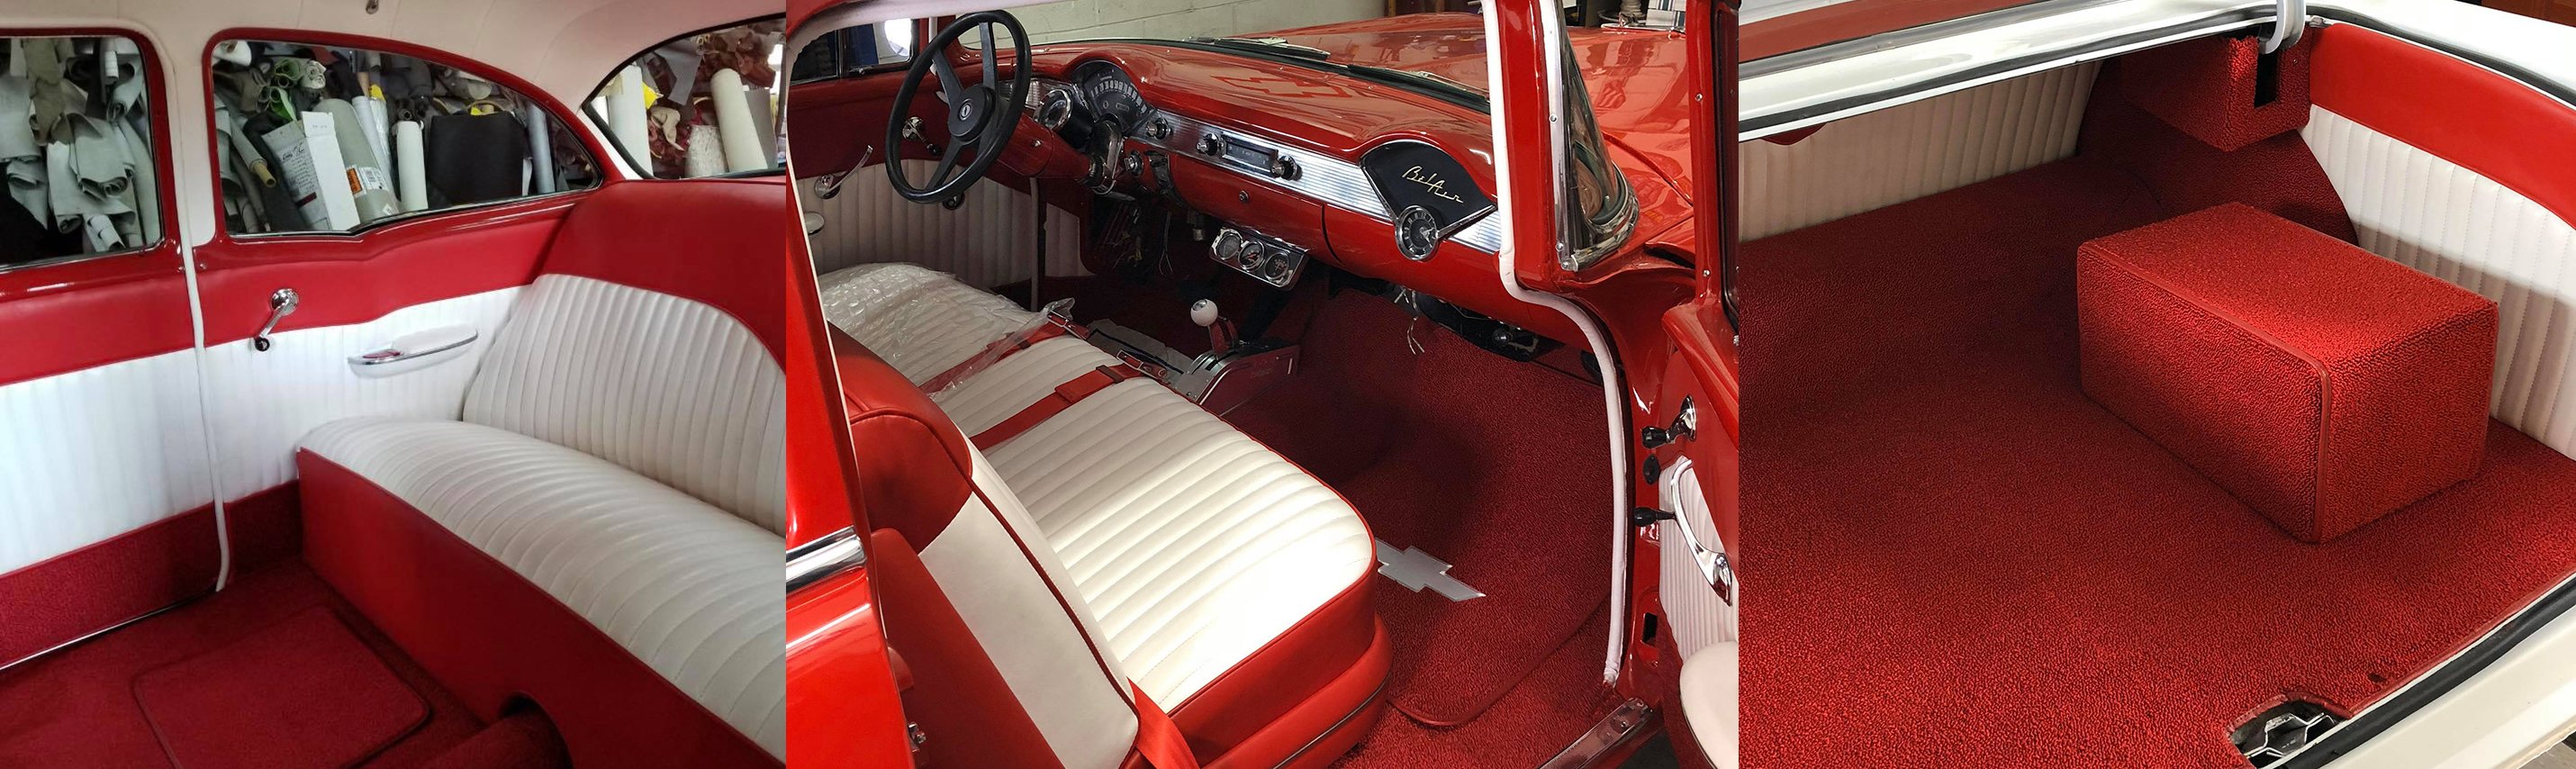 1956_Chevy_Bel_Air_red_white_7